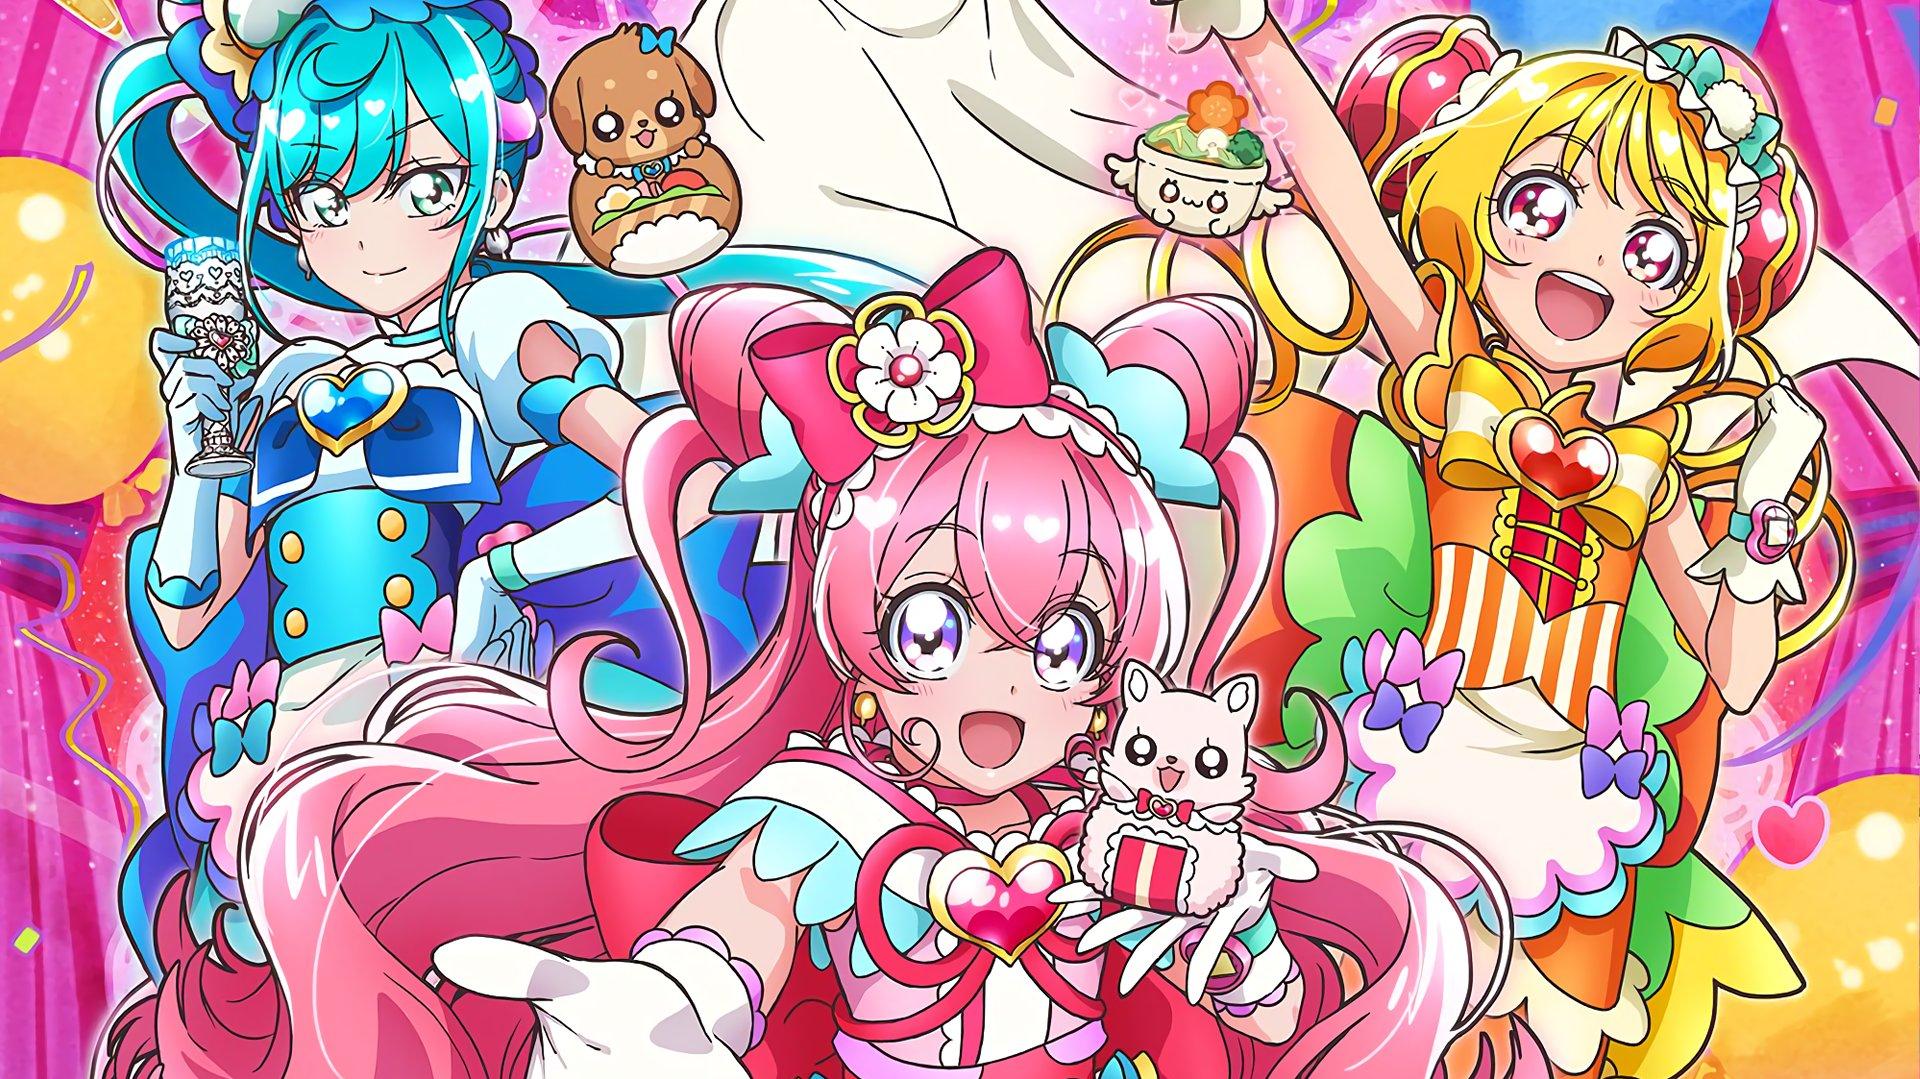 Emilyyyy Delicious Party Precure Official Art